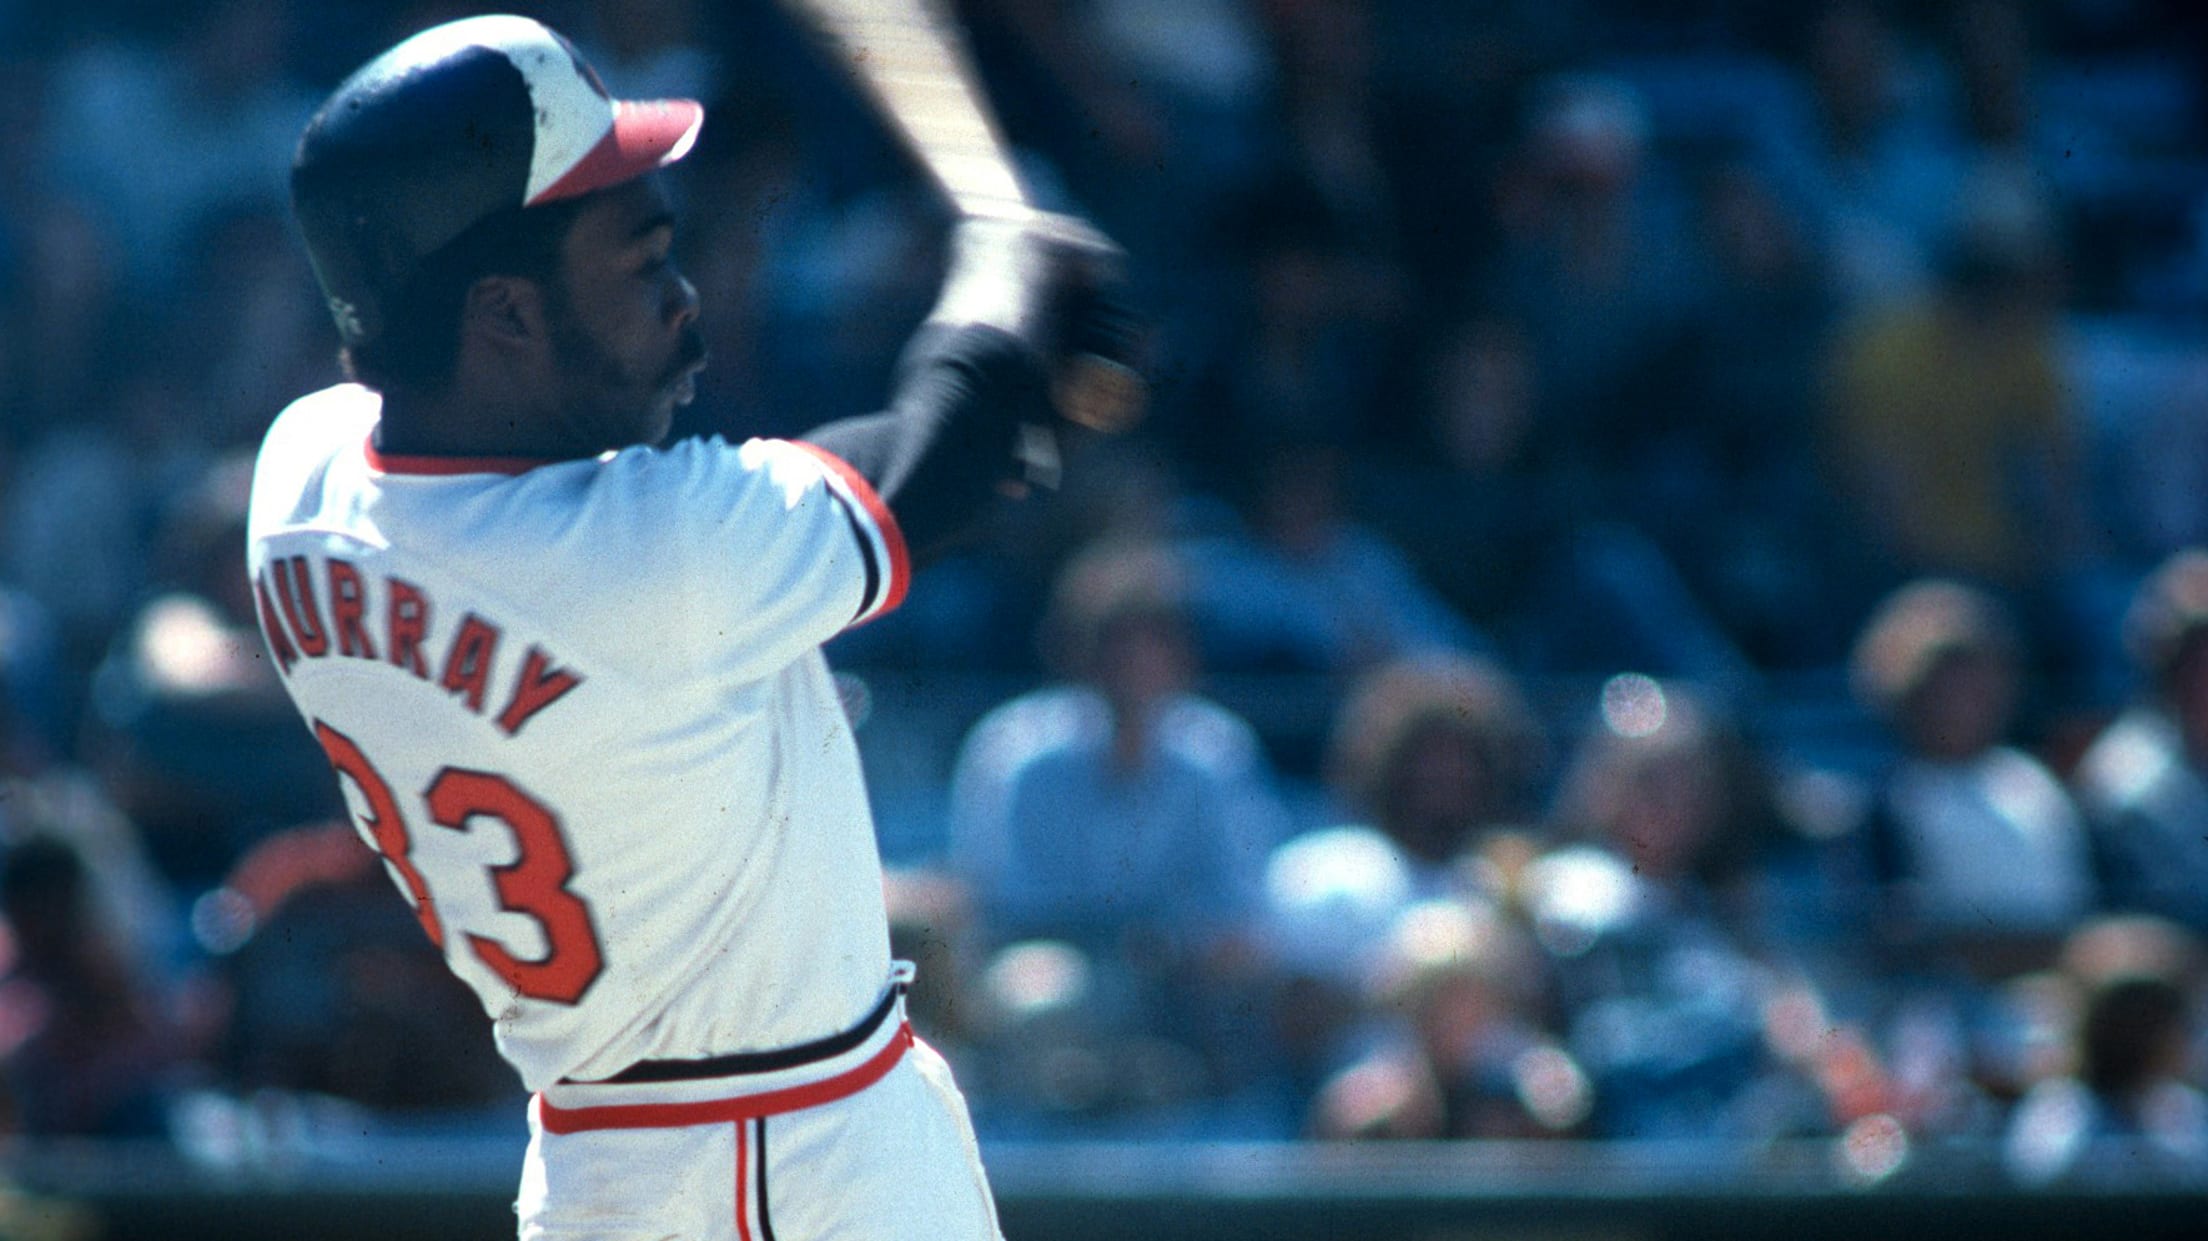 Eddie Murray joins the 3,000 hit club: On this date in Cleveland